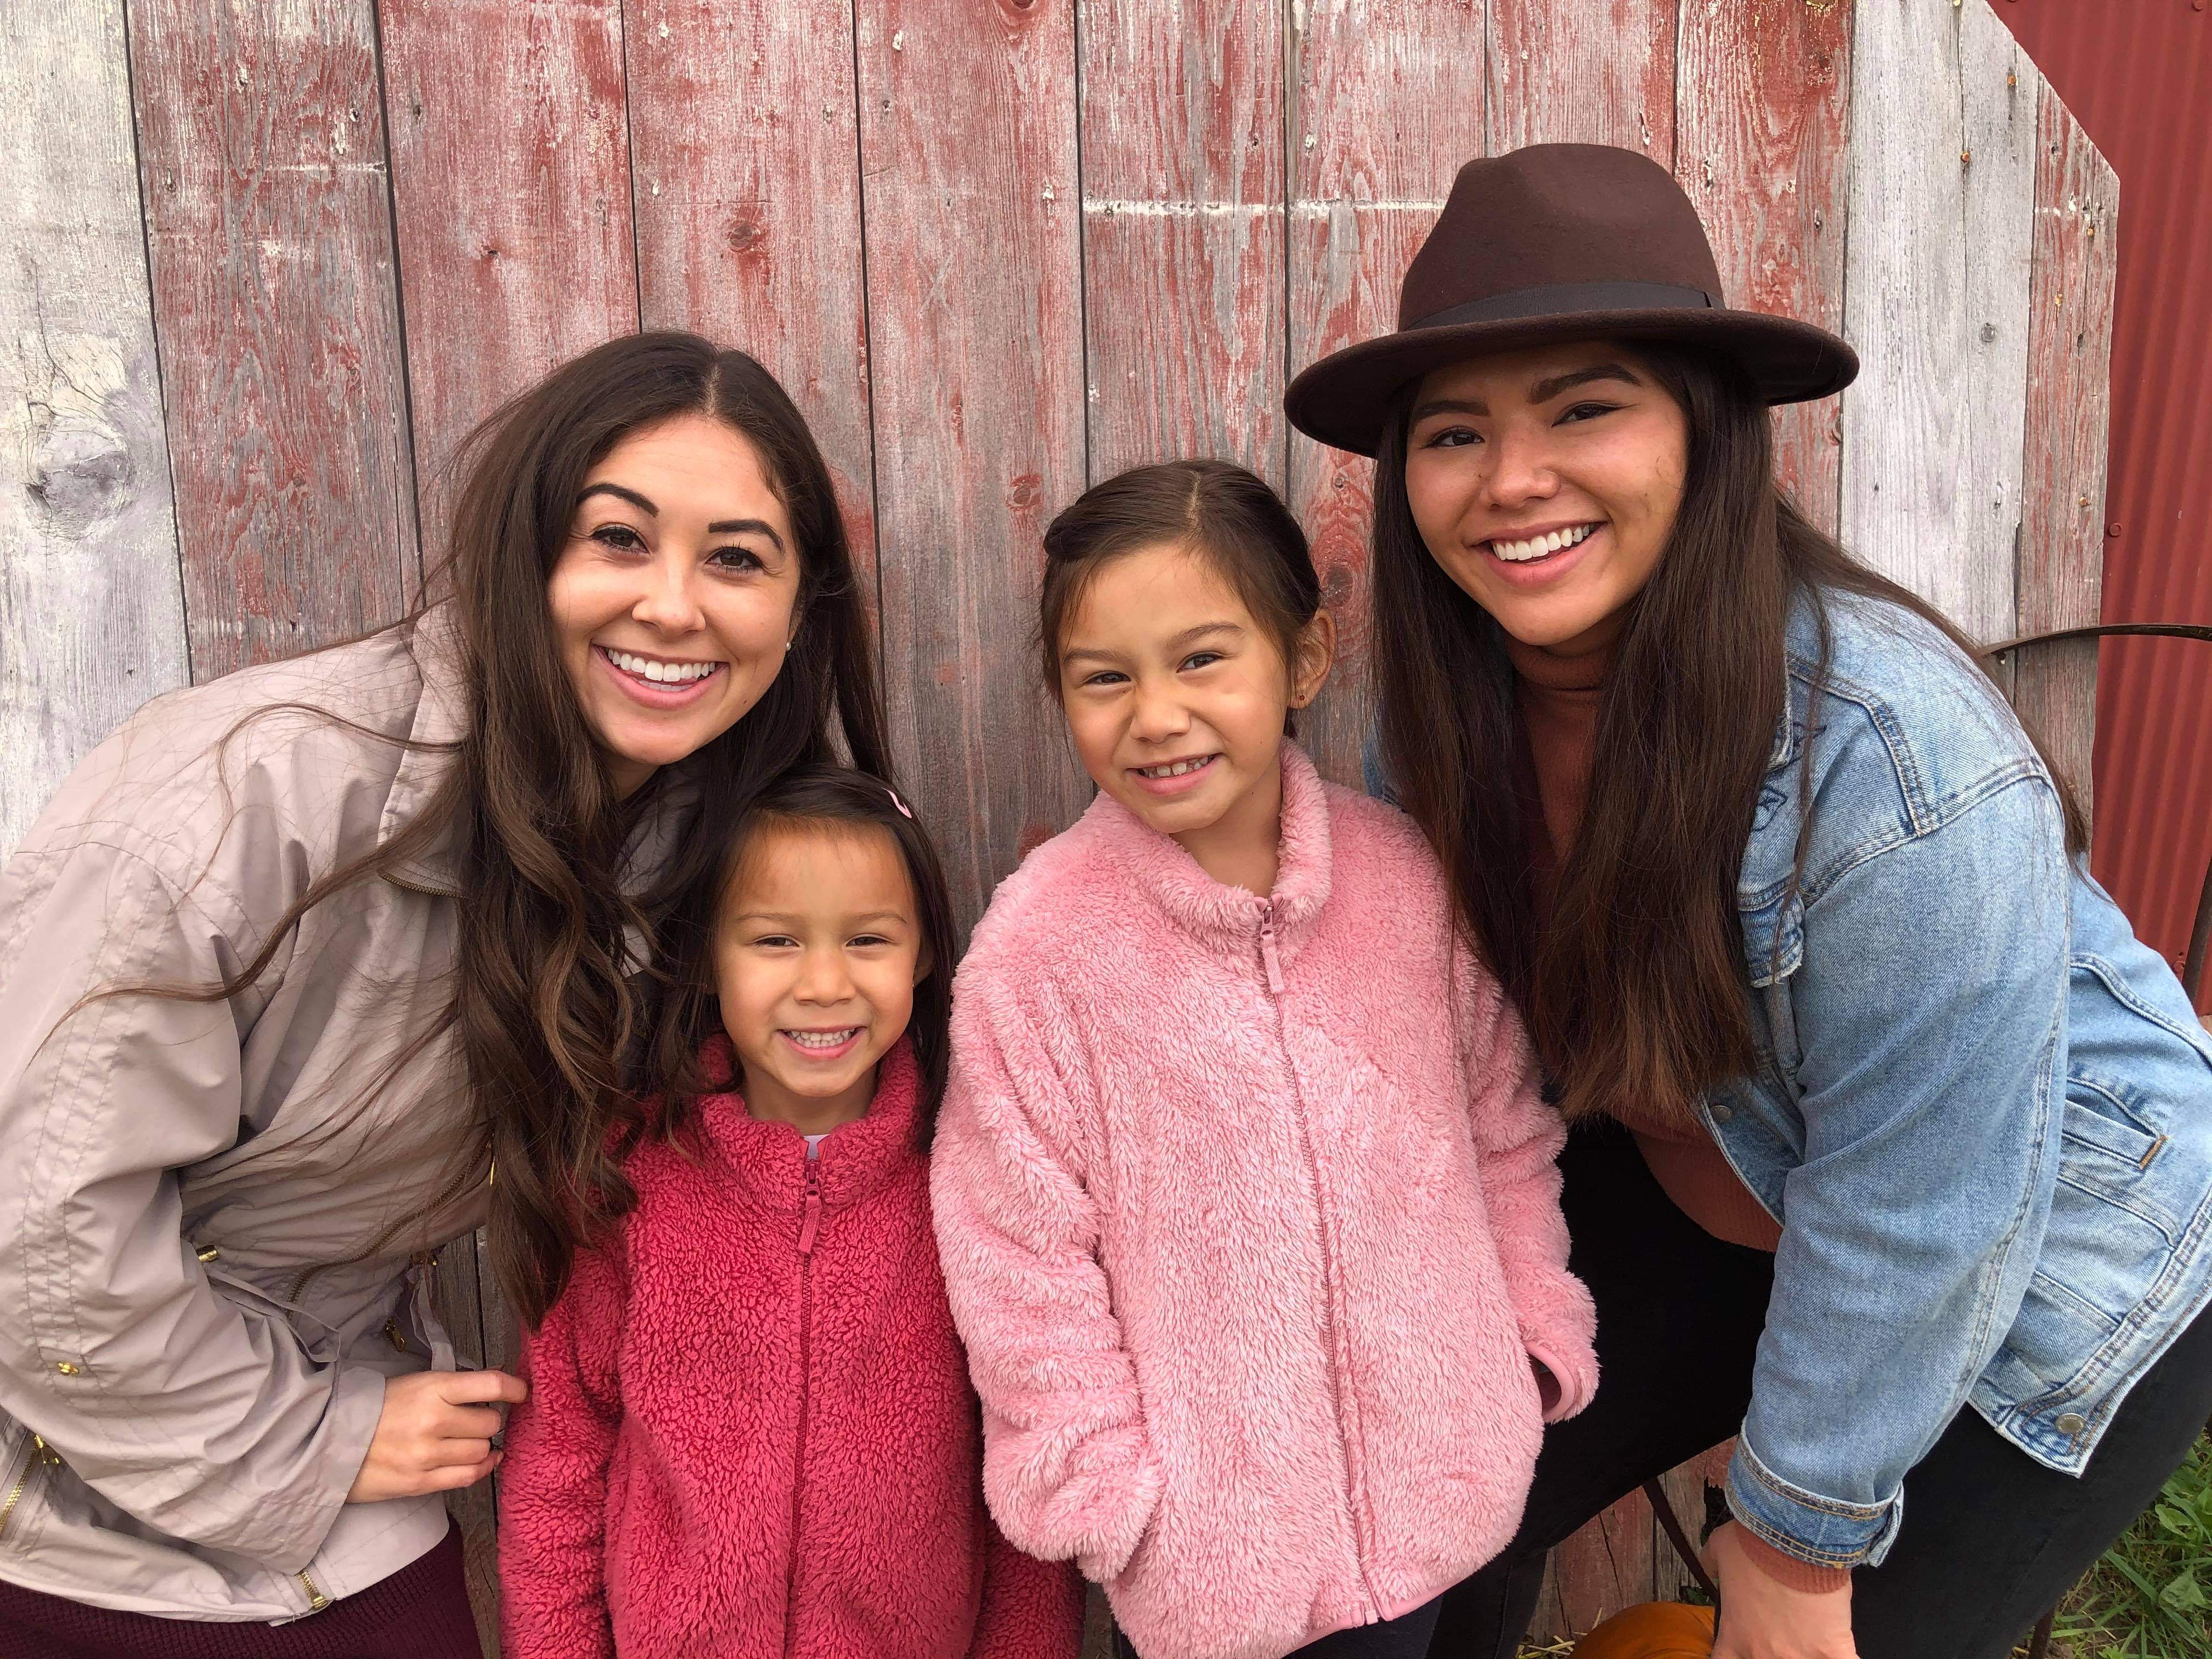 From left to right, Megan, Lana, Maya and I stand in front of a barn door smiling.